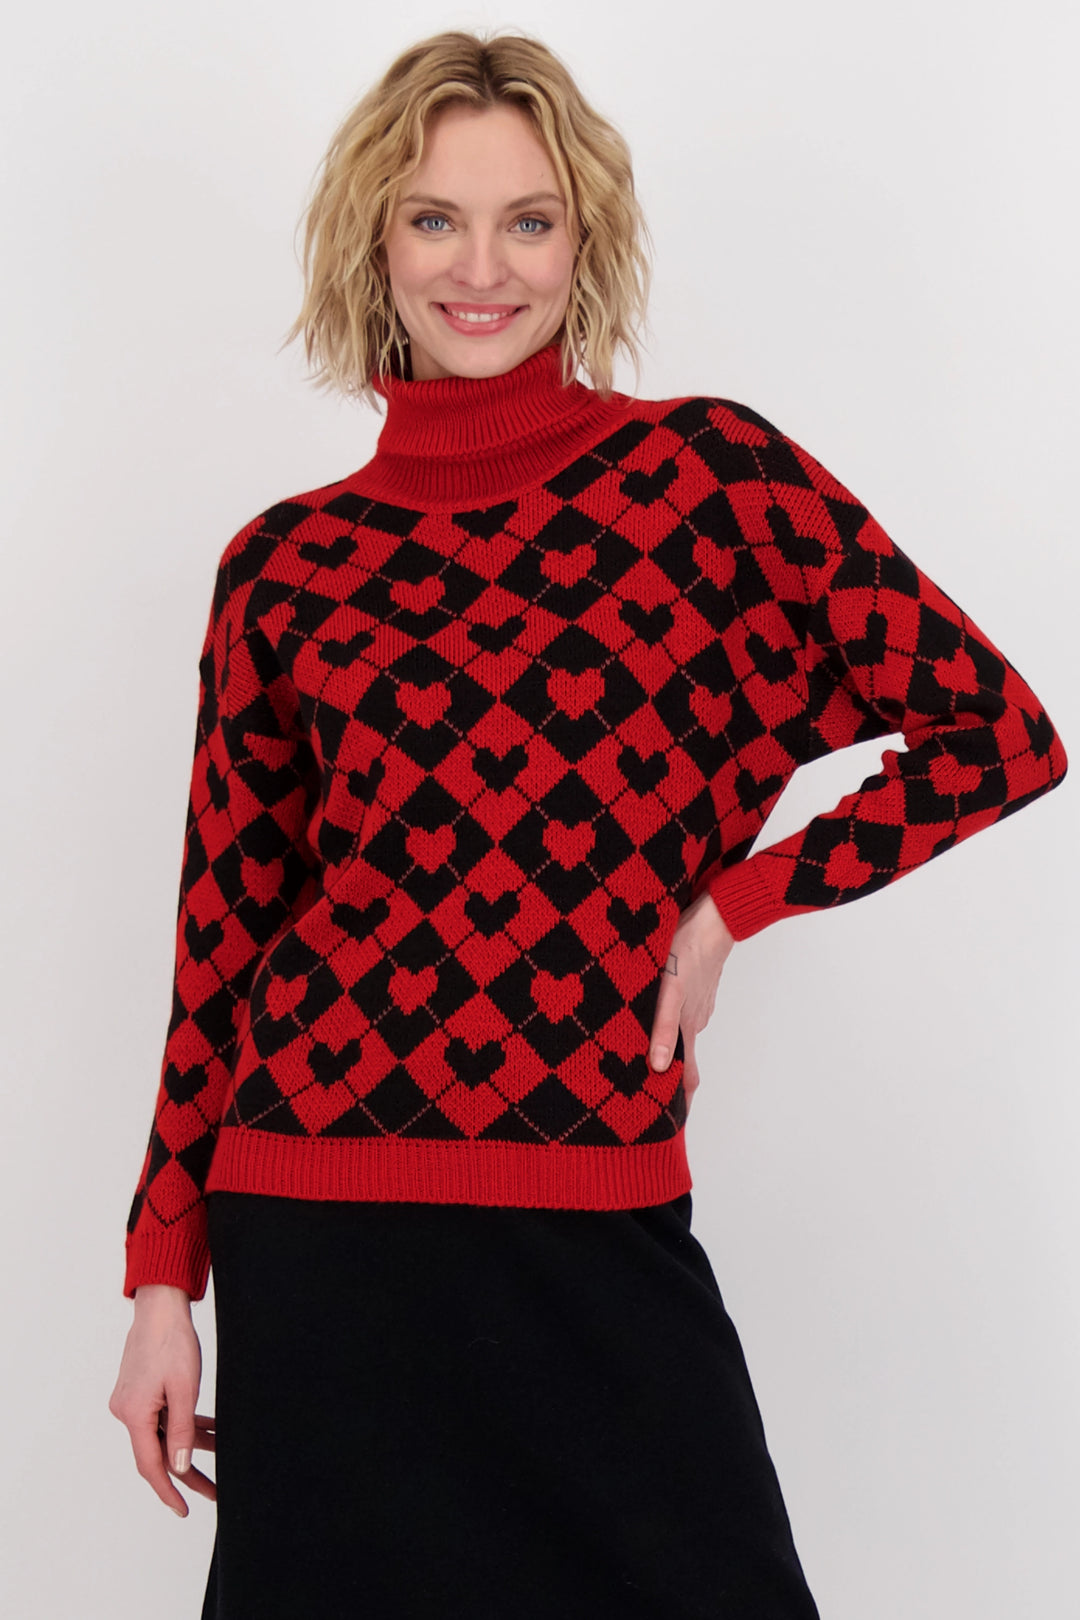 This comfy and stretchy light sweater features a stunning hearts print all-over with a plaid design. A bold red ribbed hem, cuffs and neckline complete the look.